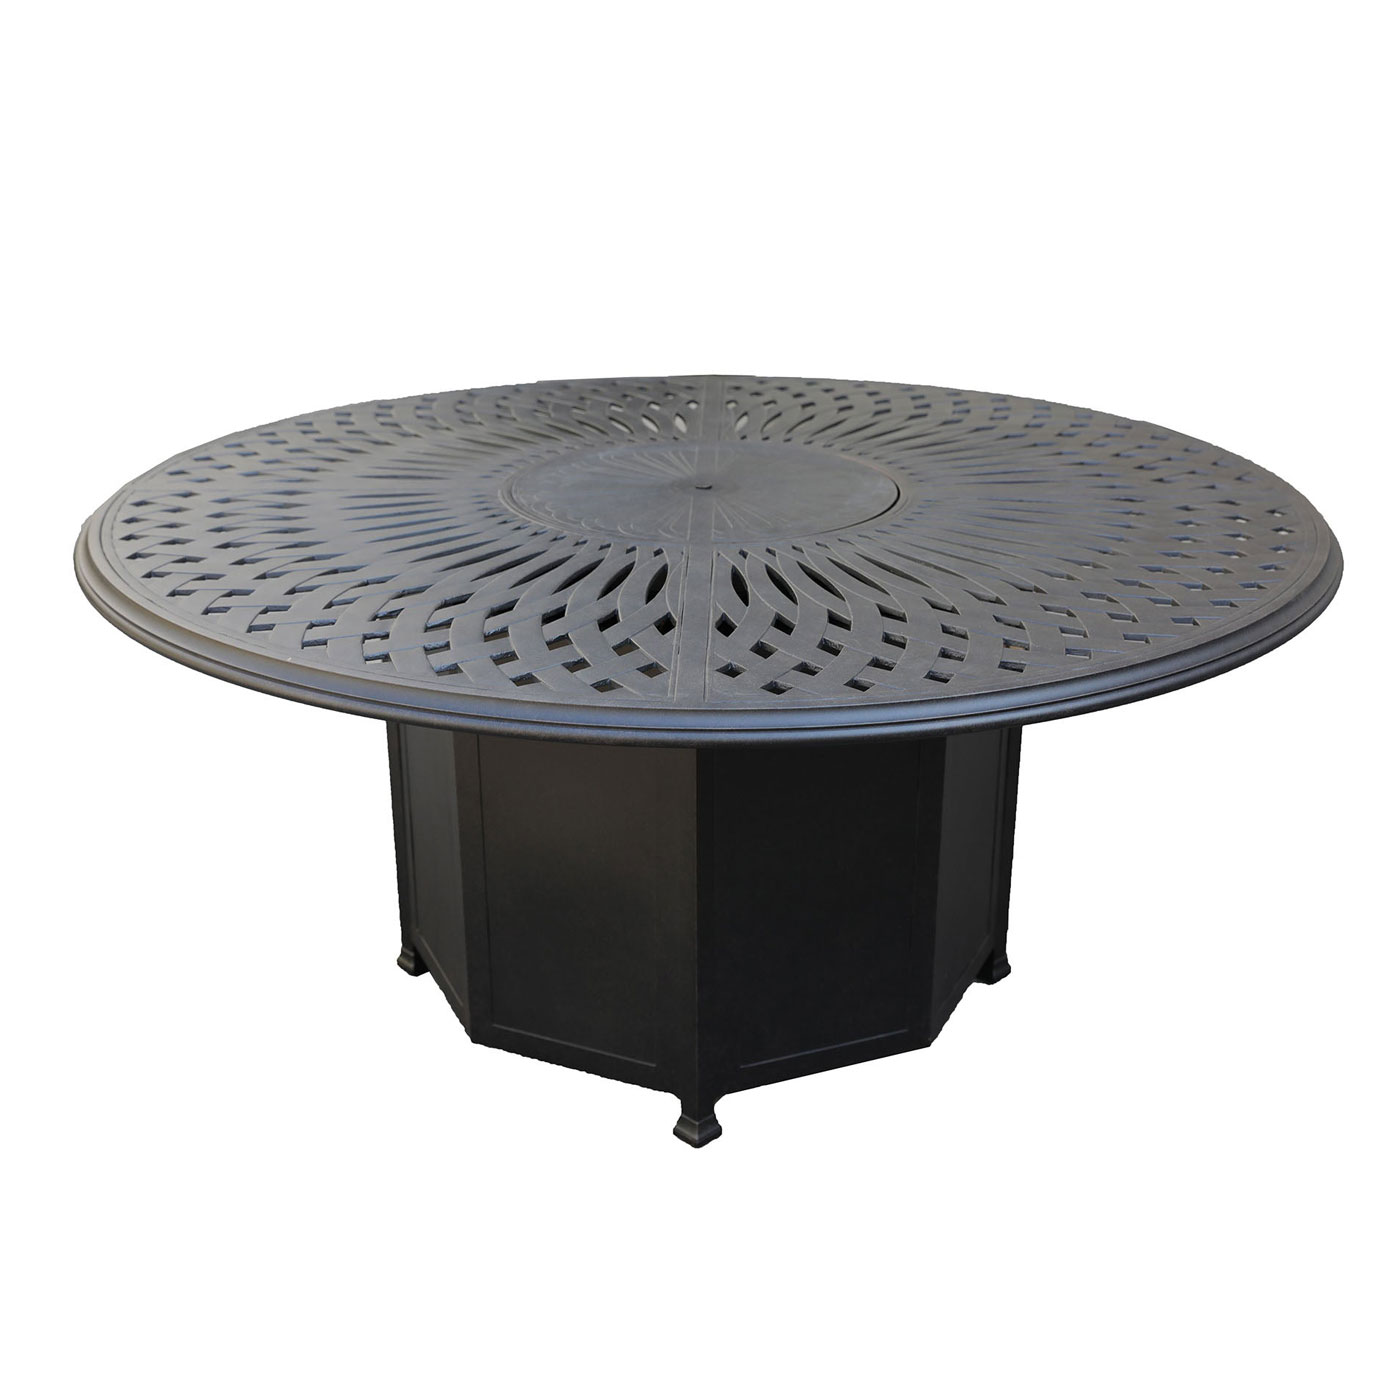 64" Round Dining Fire Table